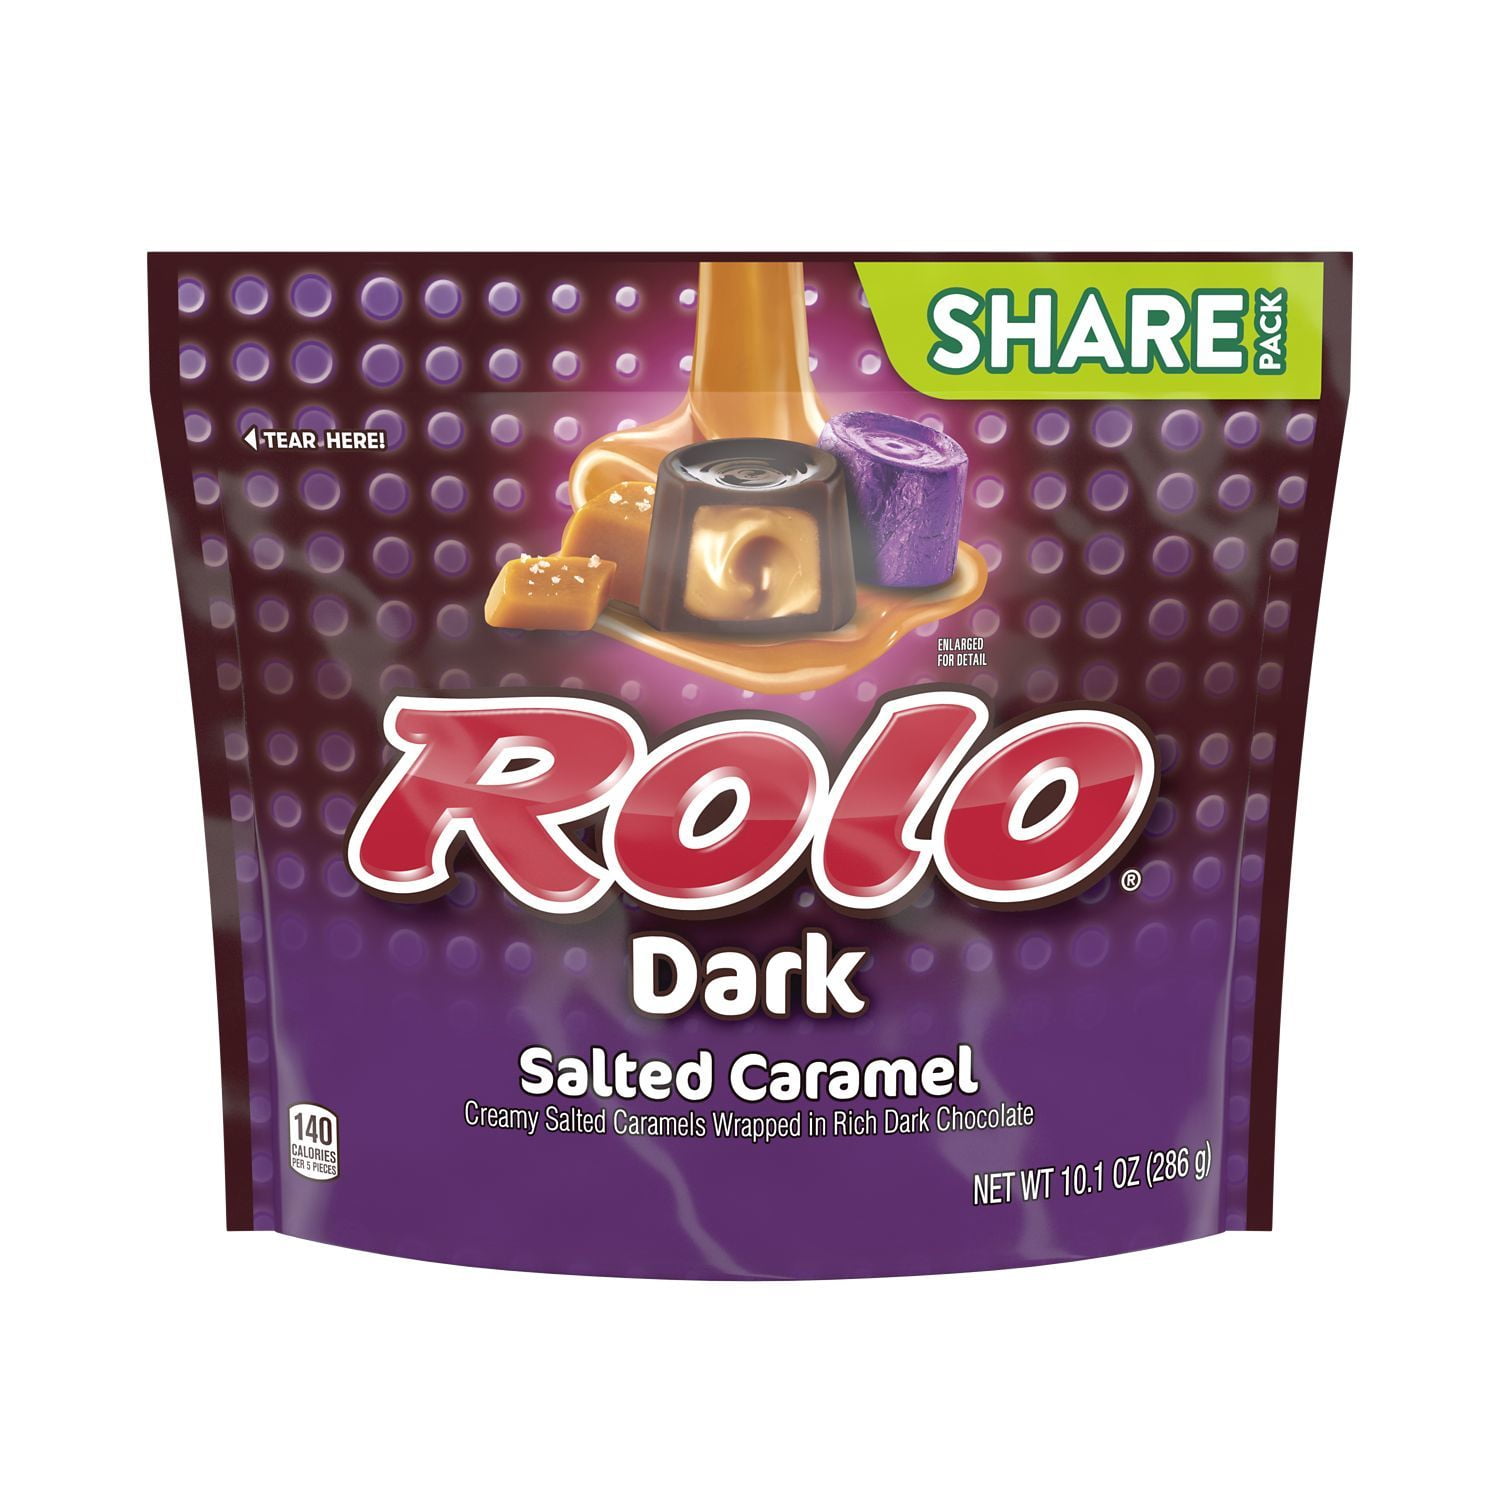 Rolo, Creamy Salted Caramels Wrapped in Dark Chocolate Candy, Gluten Free, Individually Wrapped, 10.1 oz, Share Pack